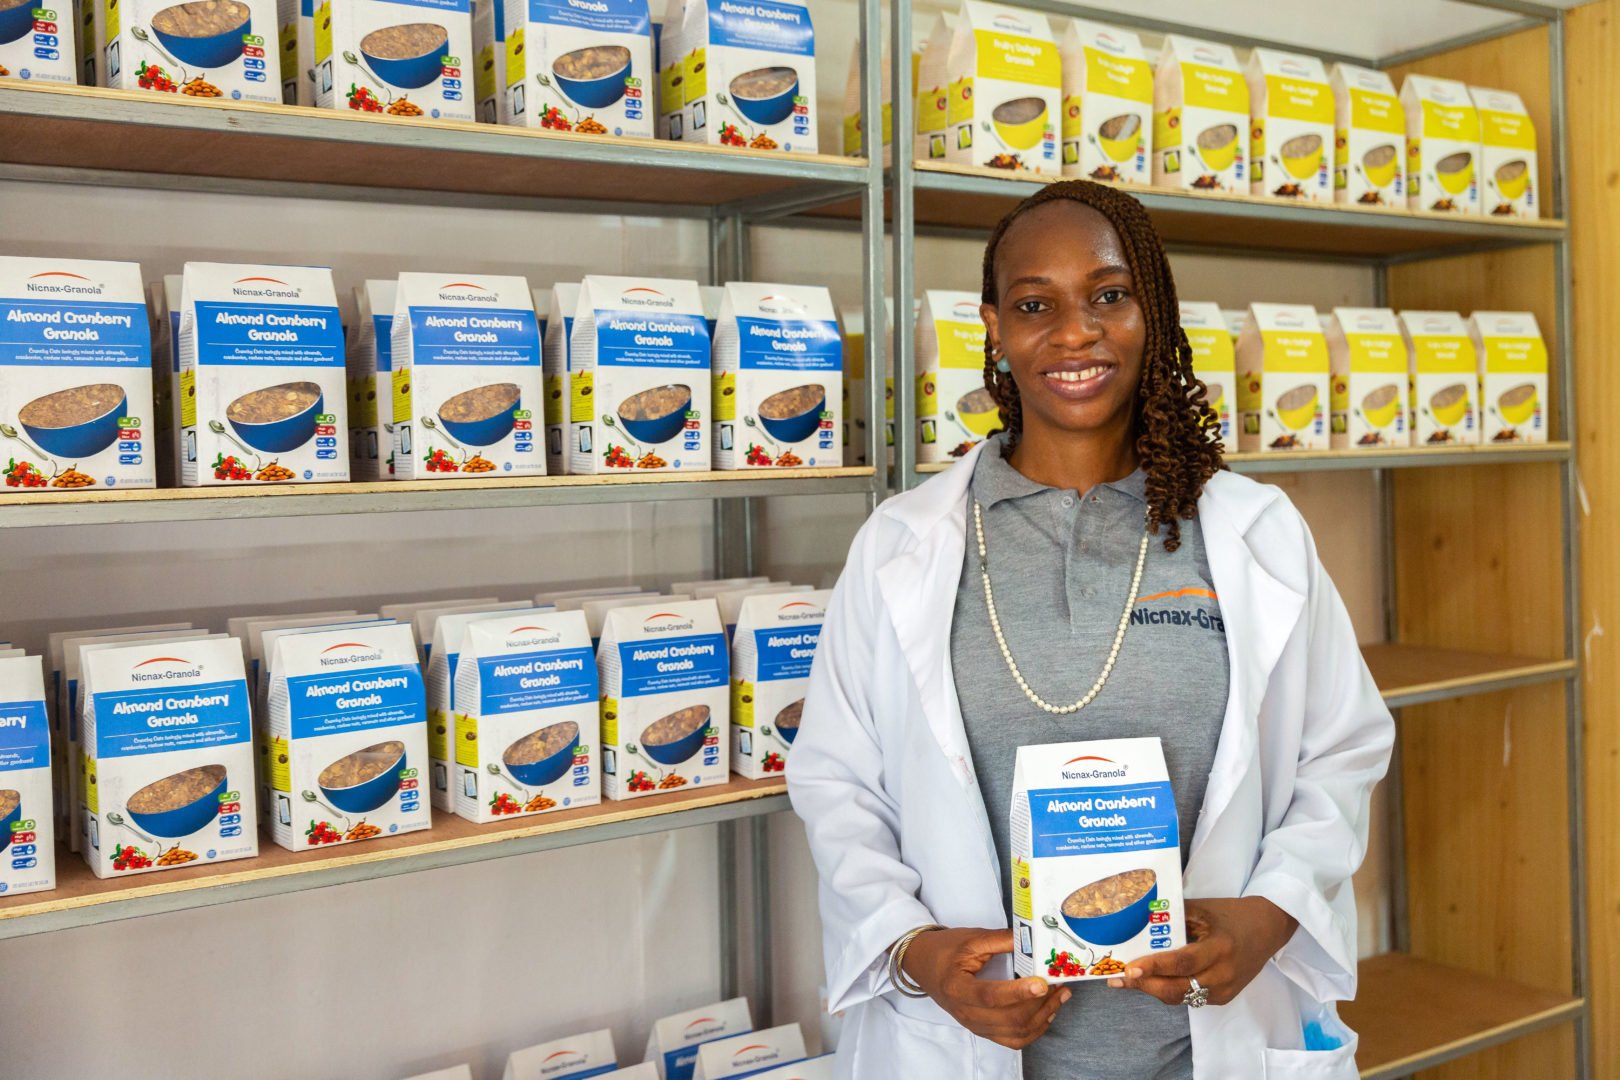 Ejiro Jakpa, the CEO of Nicnax Enterprises, poses for a portrait in front of the shelf where finished Nicnax products are kept for storage at Nicnax Enterprises in Lagos, Nigeria on 28th January 2021. The Cherie Blair Foundation for Women continues to support women entrepreneurs across many African countries, including Nigeria, through their blended learning programmes, like Road to Growth and HerVenture.